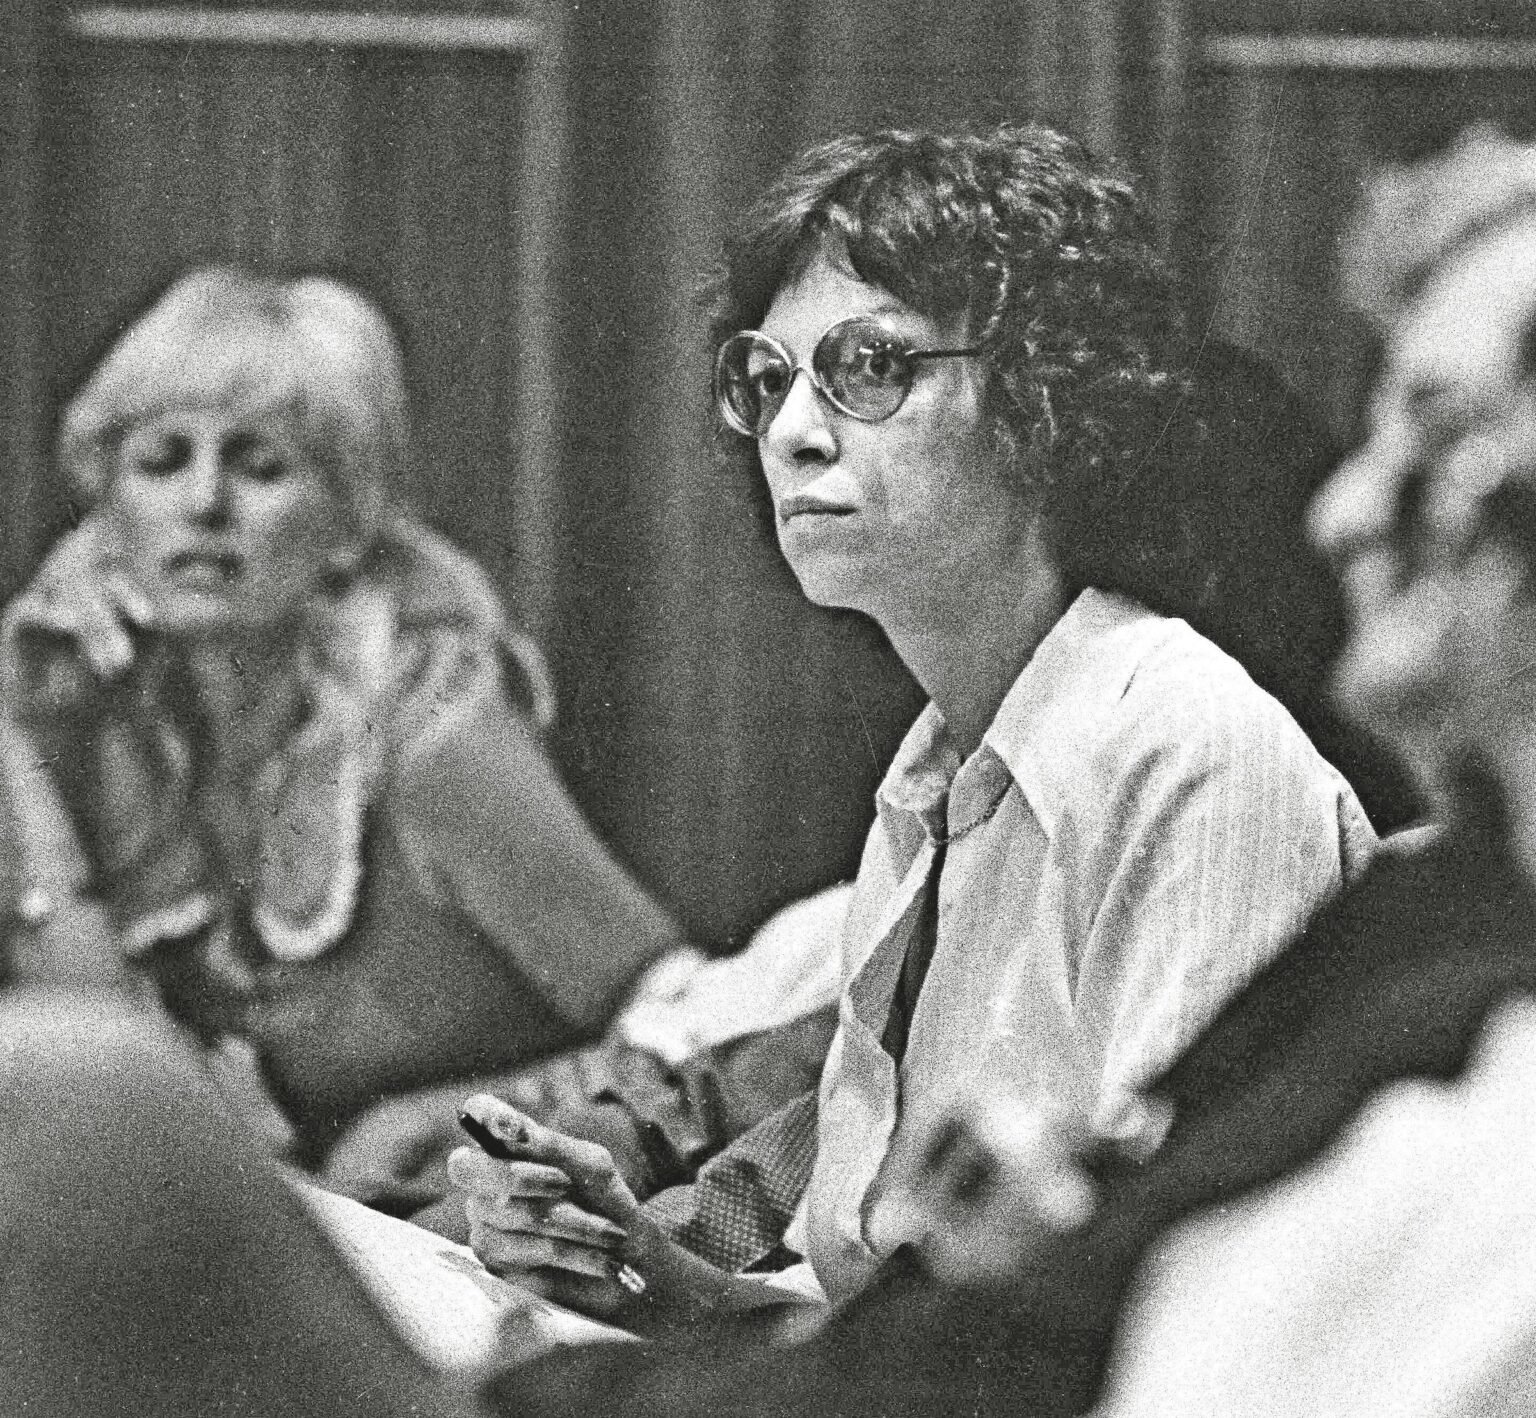 Carole Ann Boone was the wife of the infamous rapist & serial killer, Ted Bundy. Find out what she's been up to lately.